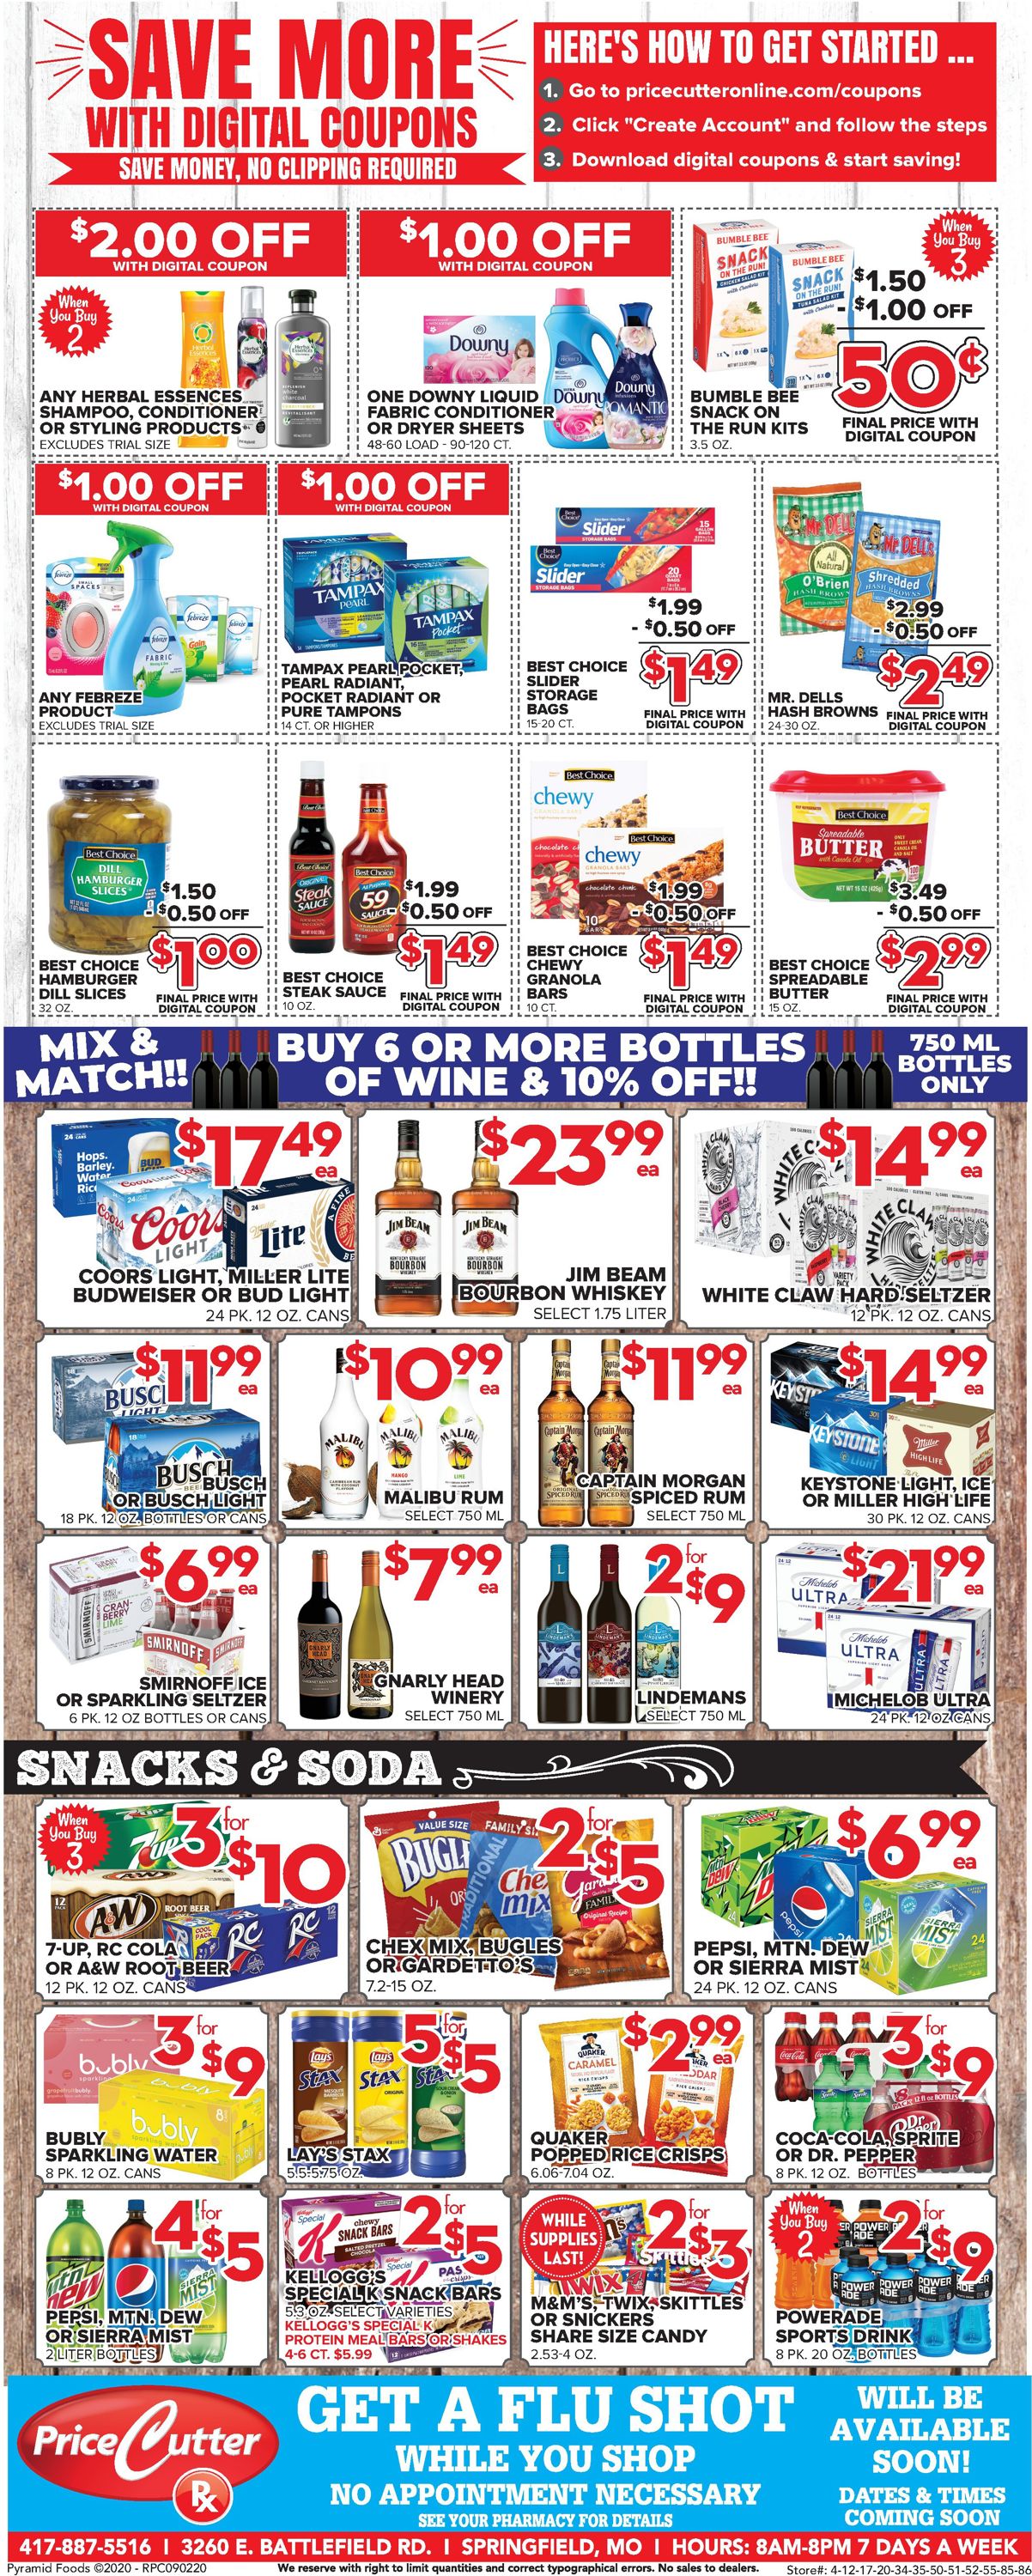 Price Cutter Weekly Ad Circular - valid 09/02-09/08/2020 (Page 4)